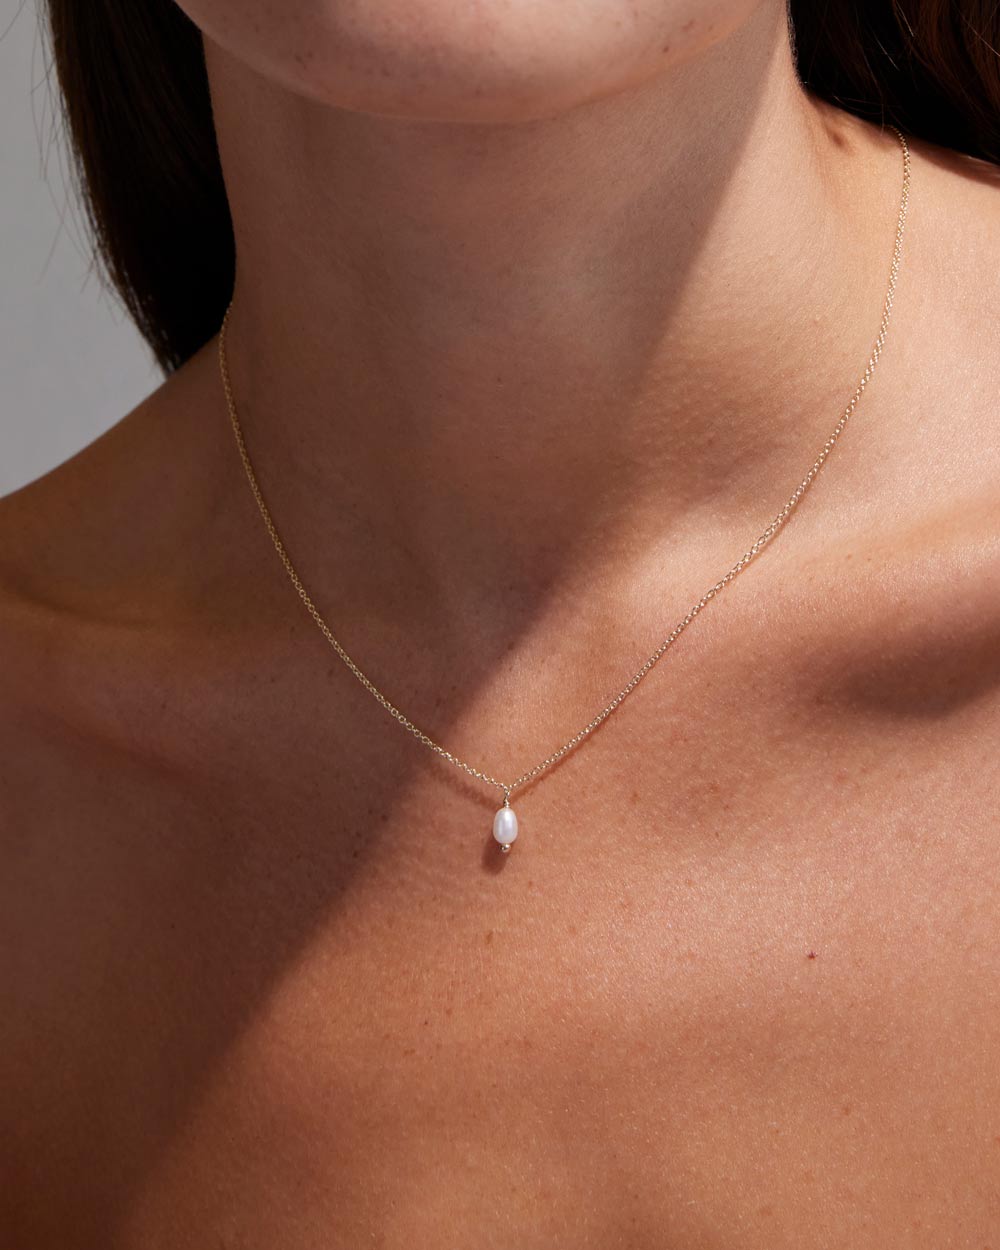 CLASSIC PEARL NECKLACE (9K GOLD)